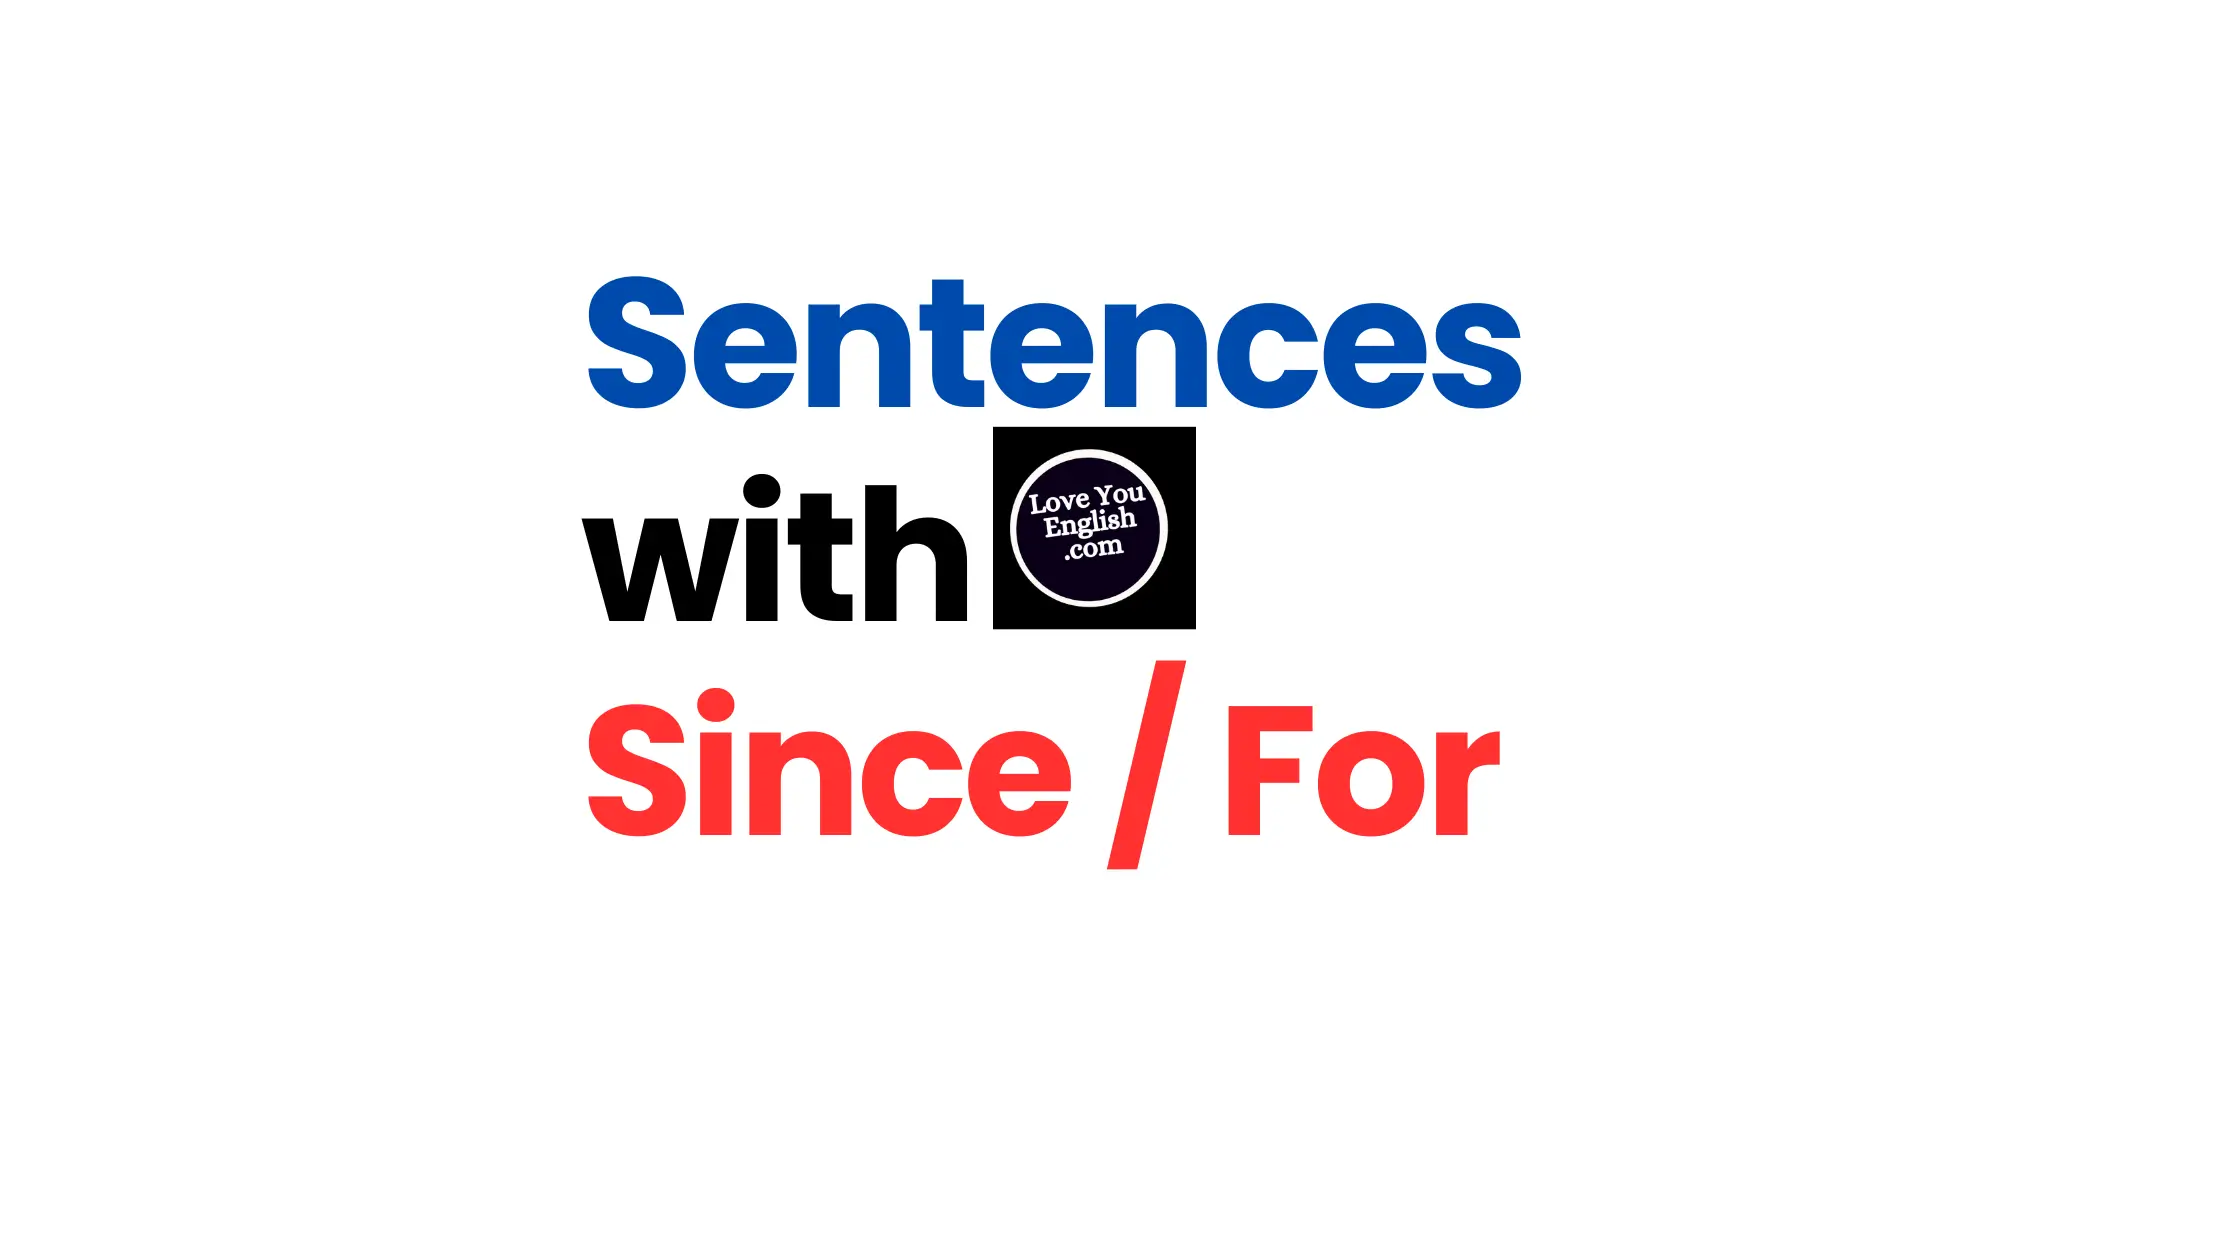 Sentences using "for" and "Since"